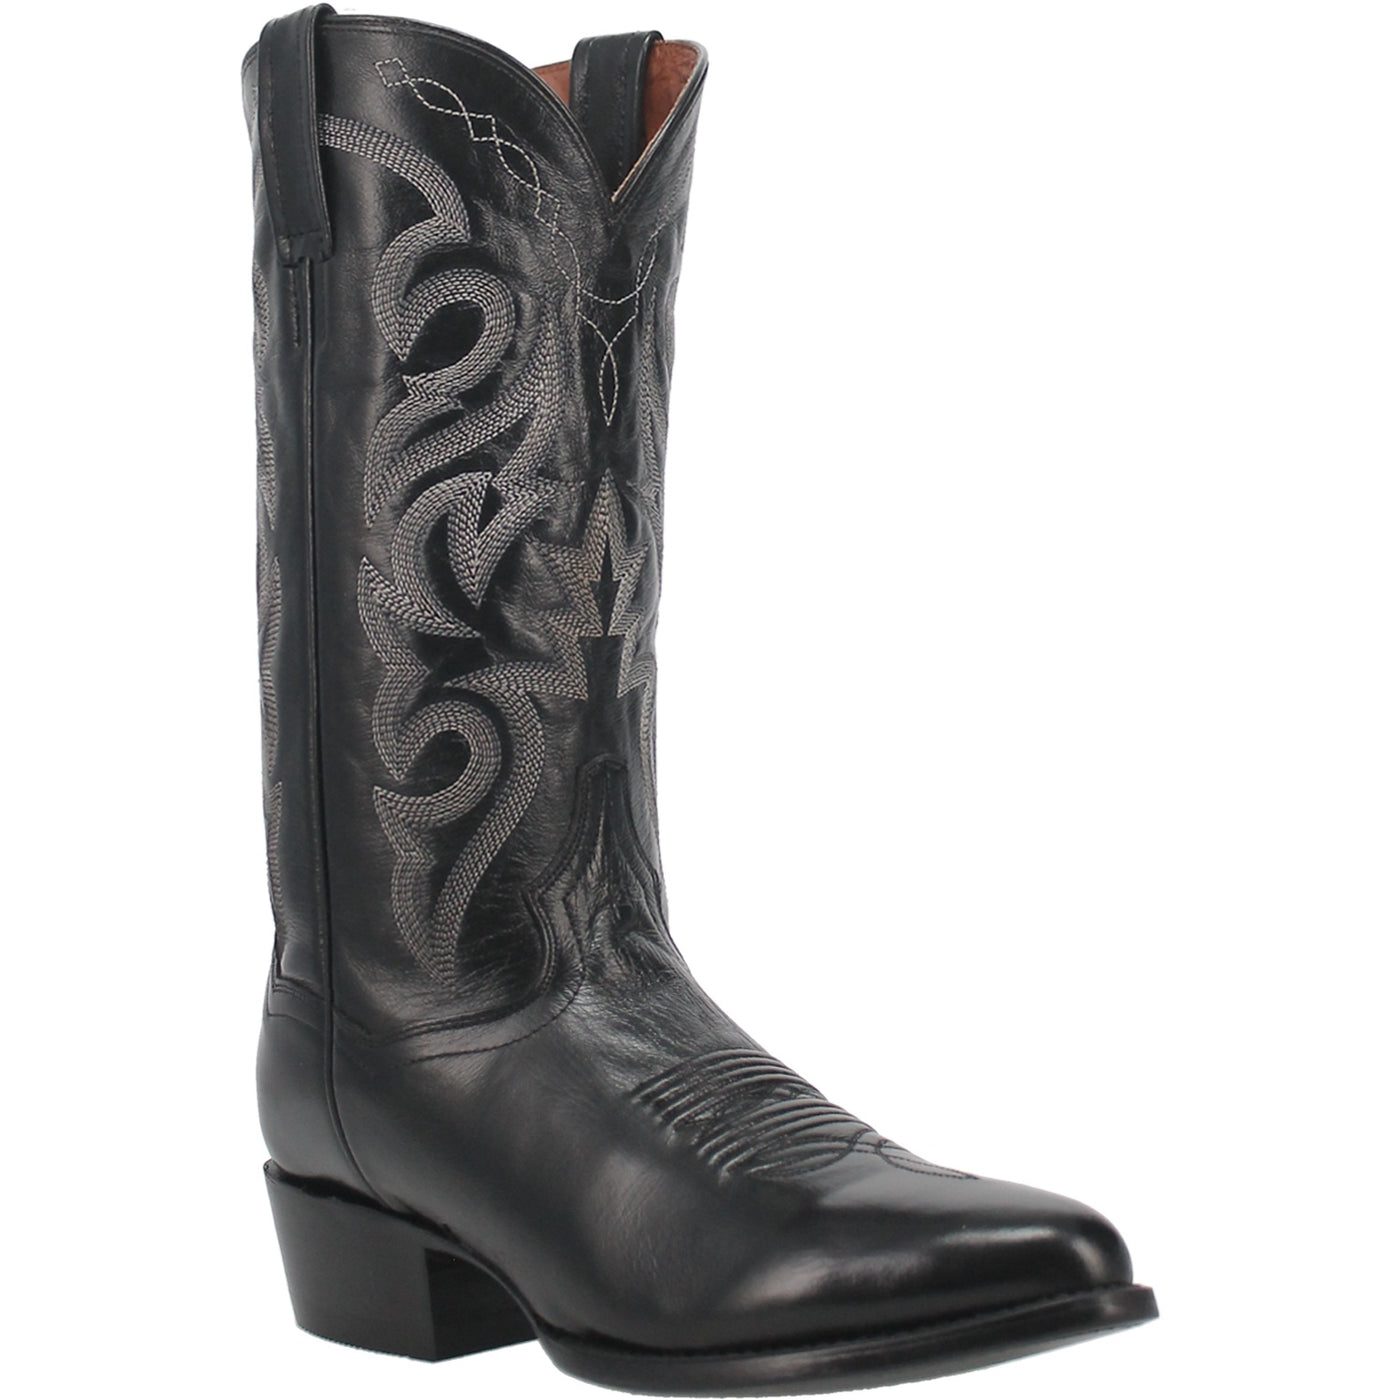 You'll look great and feel great in the Milwaukee boot. Crafted with fine leather, classic western stitching, a rounded toe, and cowboy heel. The Comfort Cushion insole makes it one of the most comfortable boots you'll own.  Style: DP2110R  LEATHER 13" HEIGHT 13" CIRCUMFERENCE LEATHER LINING REMOVABLE ANTIBACTERIAL & ANTIFUNGAL SOFT STRIKE ORTHOTIC ROUND TOE LEATHER OUTSOLE COWBOY HEEL Heel Height: 1 1/4"